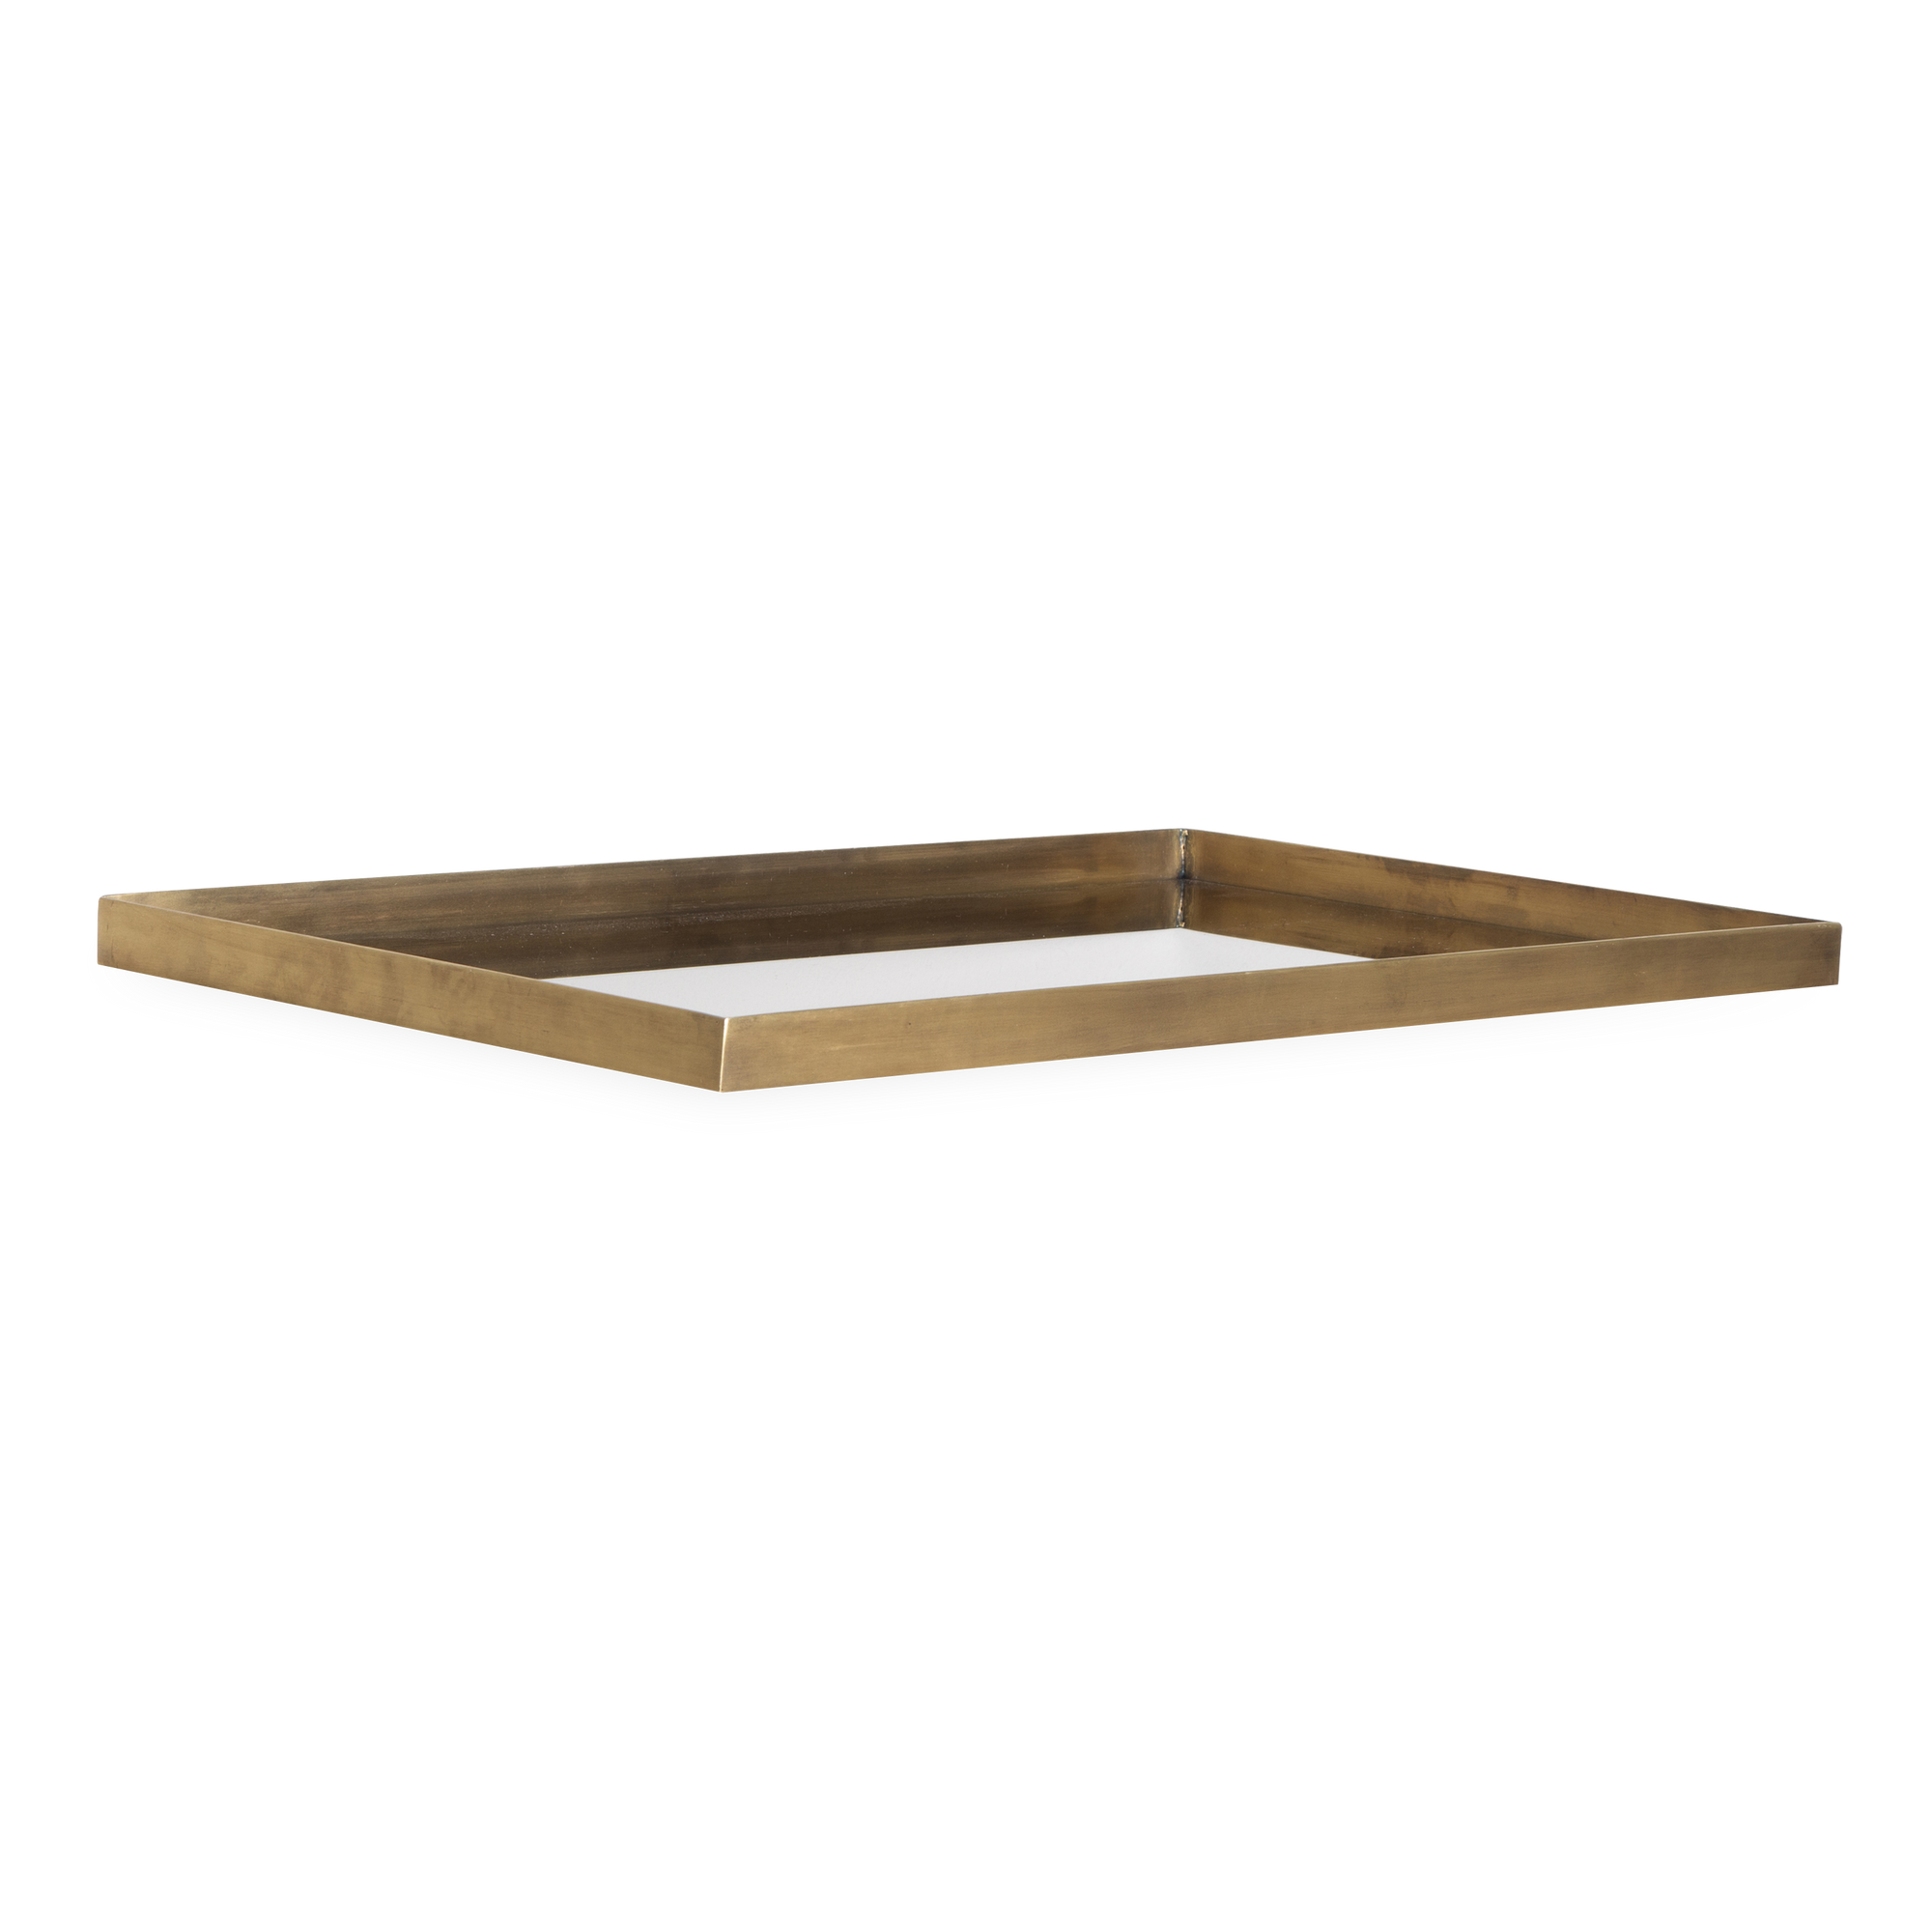 Characterized by its confident presence and its luxurious build quality, the Reflect Rectangular Tray is defined by its clean, sharp lines and its elevation of simple forms.